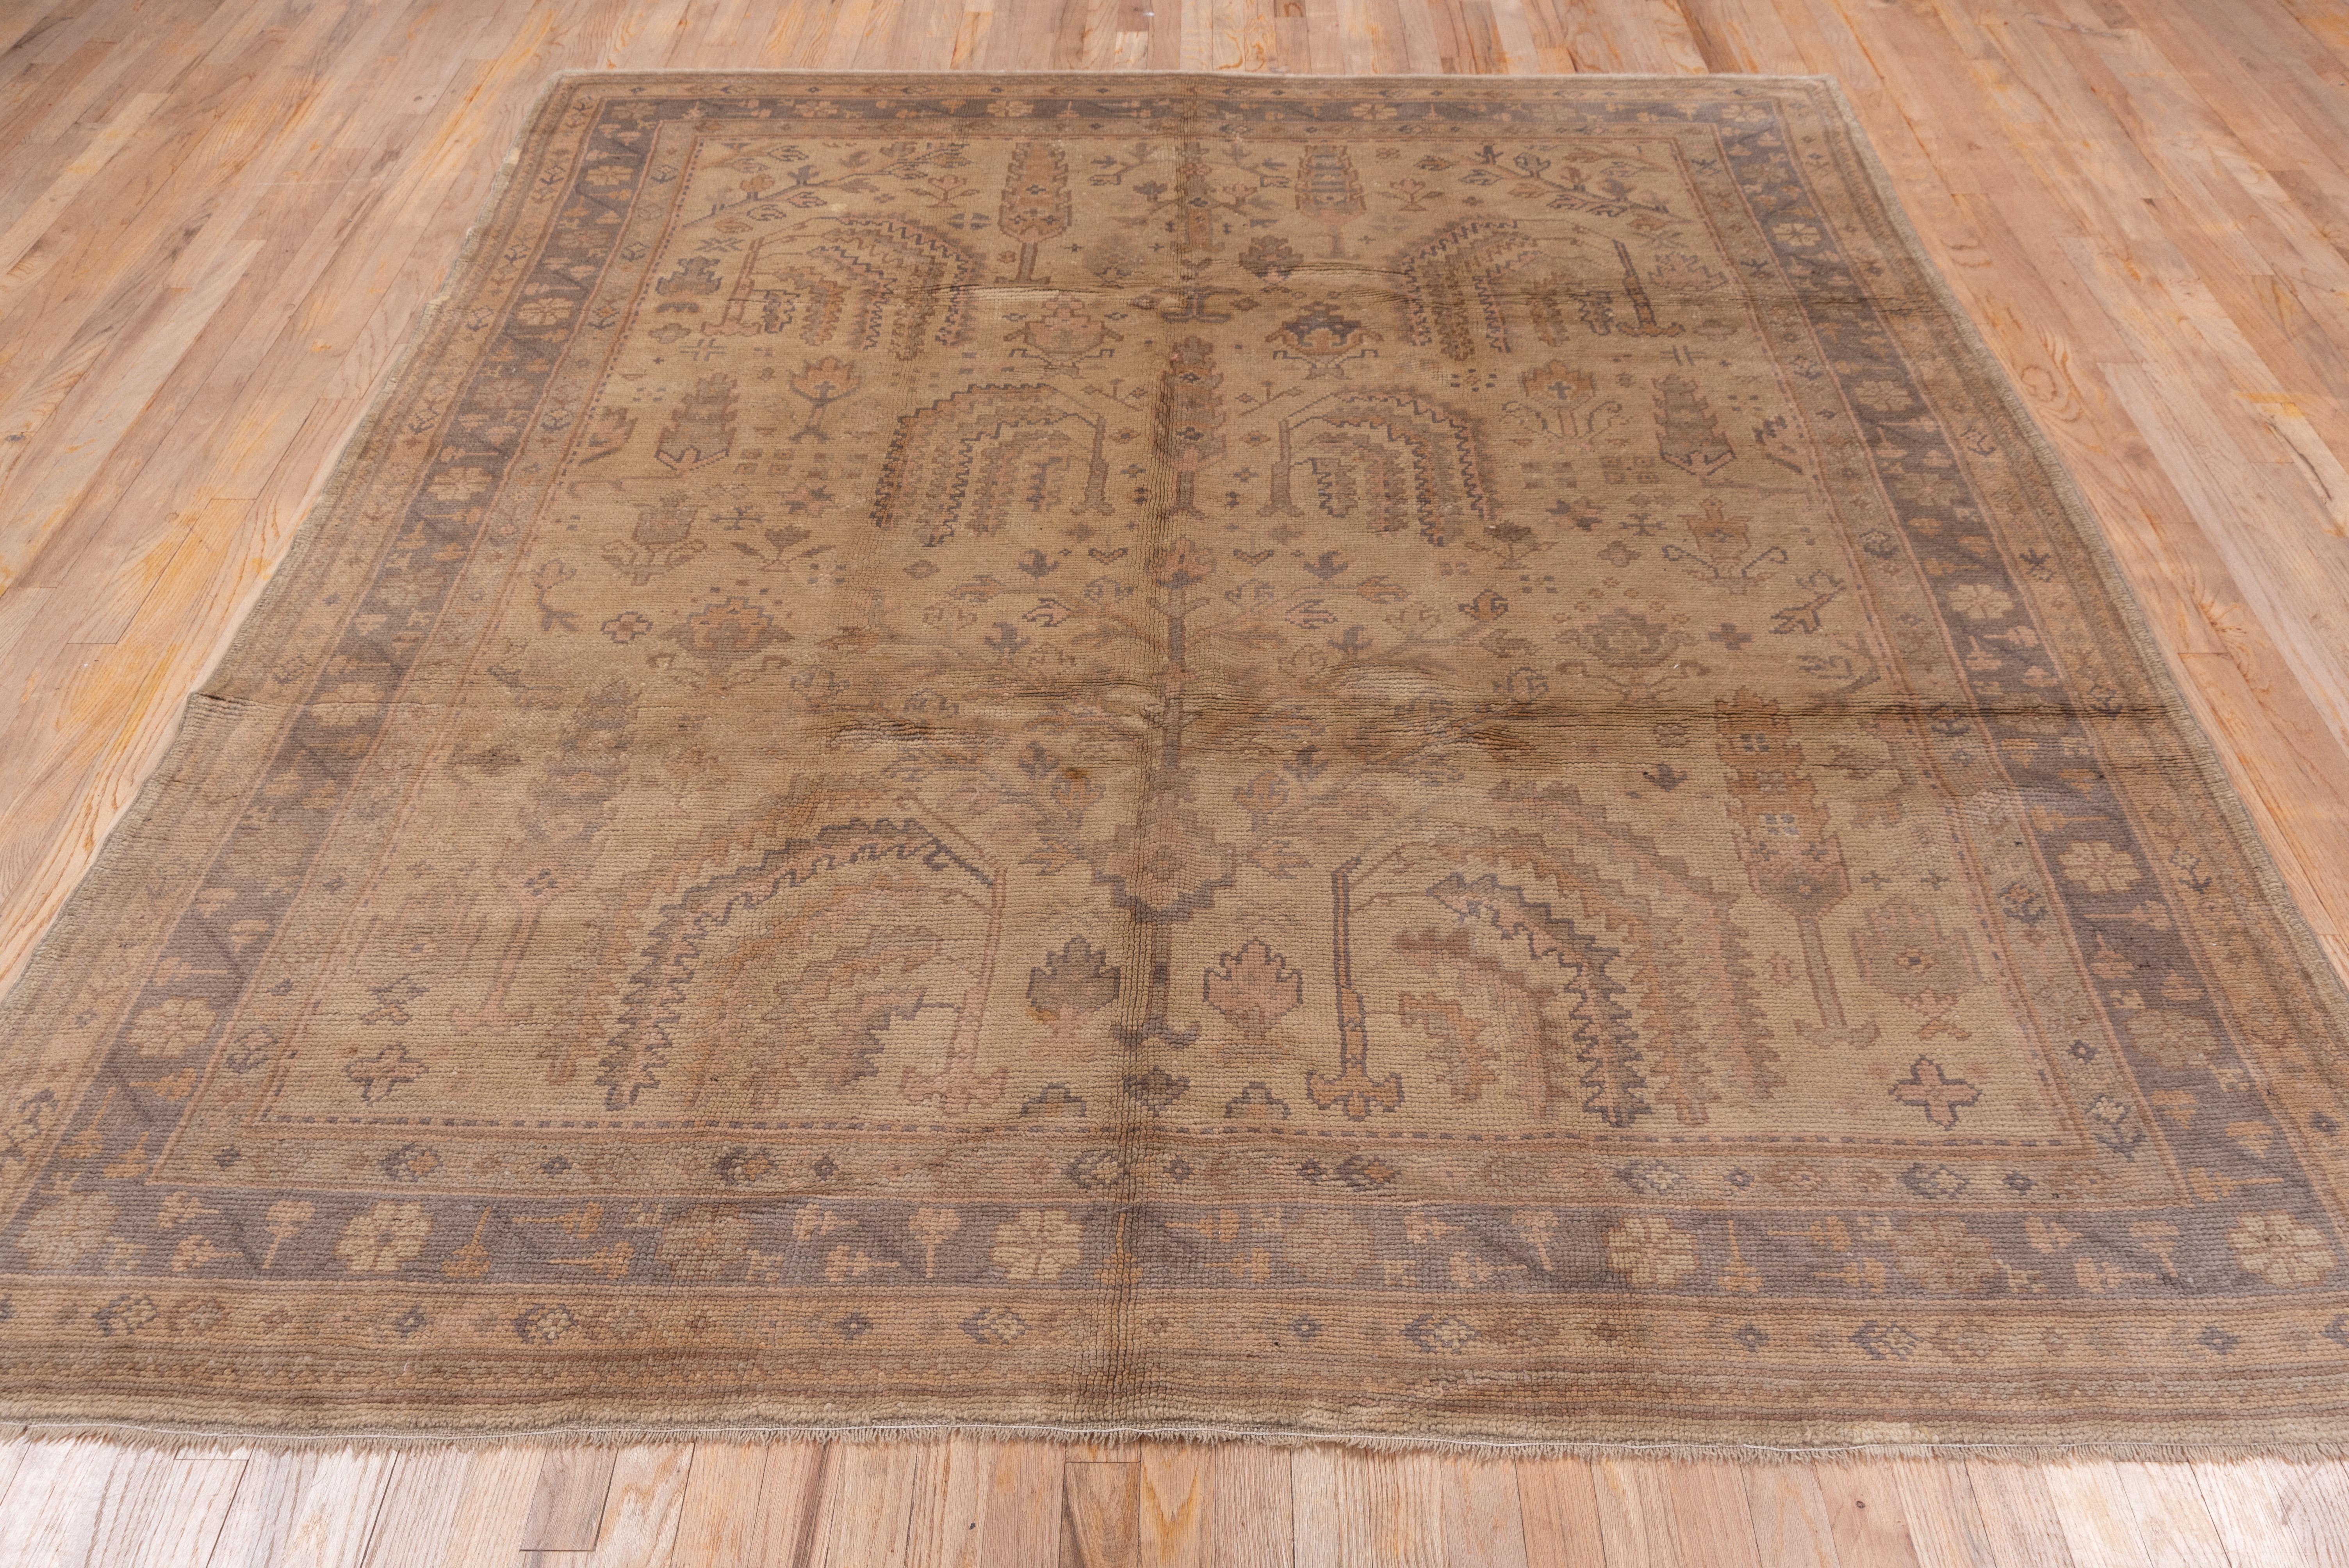 Antique Turkish Oushak rugs, are a type of handmade textile originating from the Oushak region in Western Anatolia, Turkey. These rugs have a rich history dating back to the 15th century and are known for their distinctive designs, colors, and